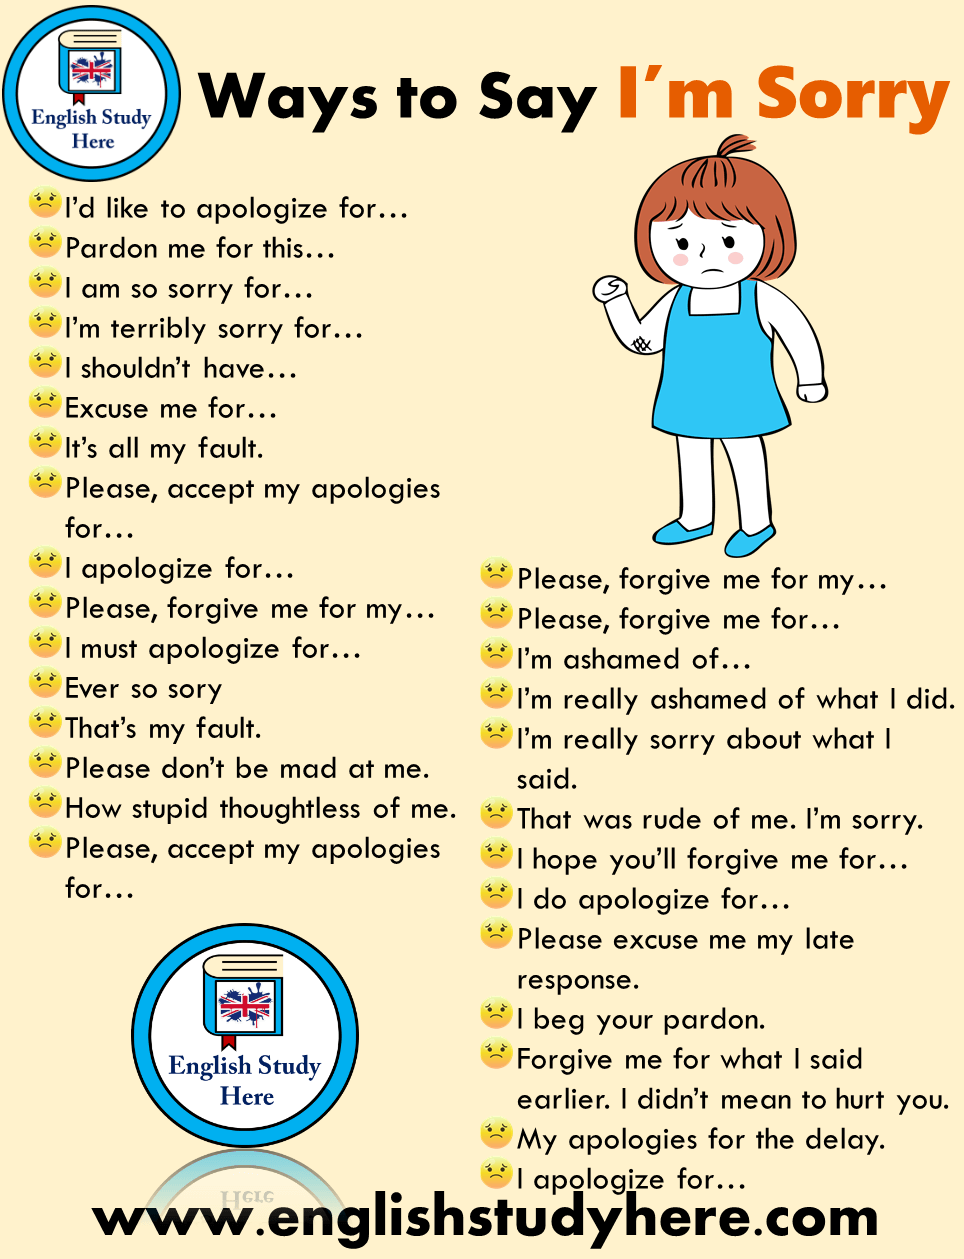 Apologize ways to When and